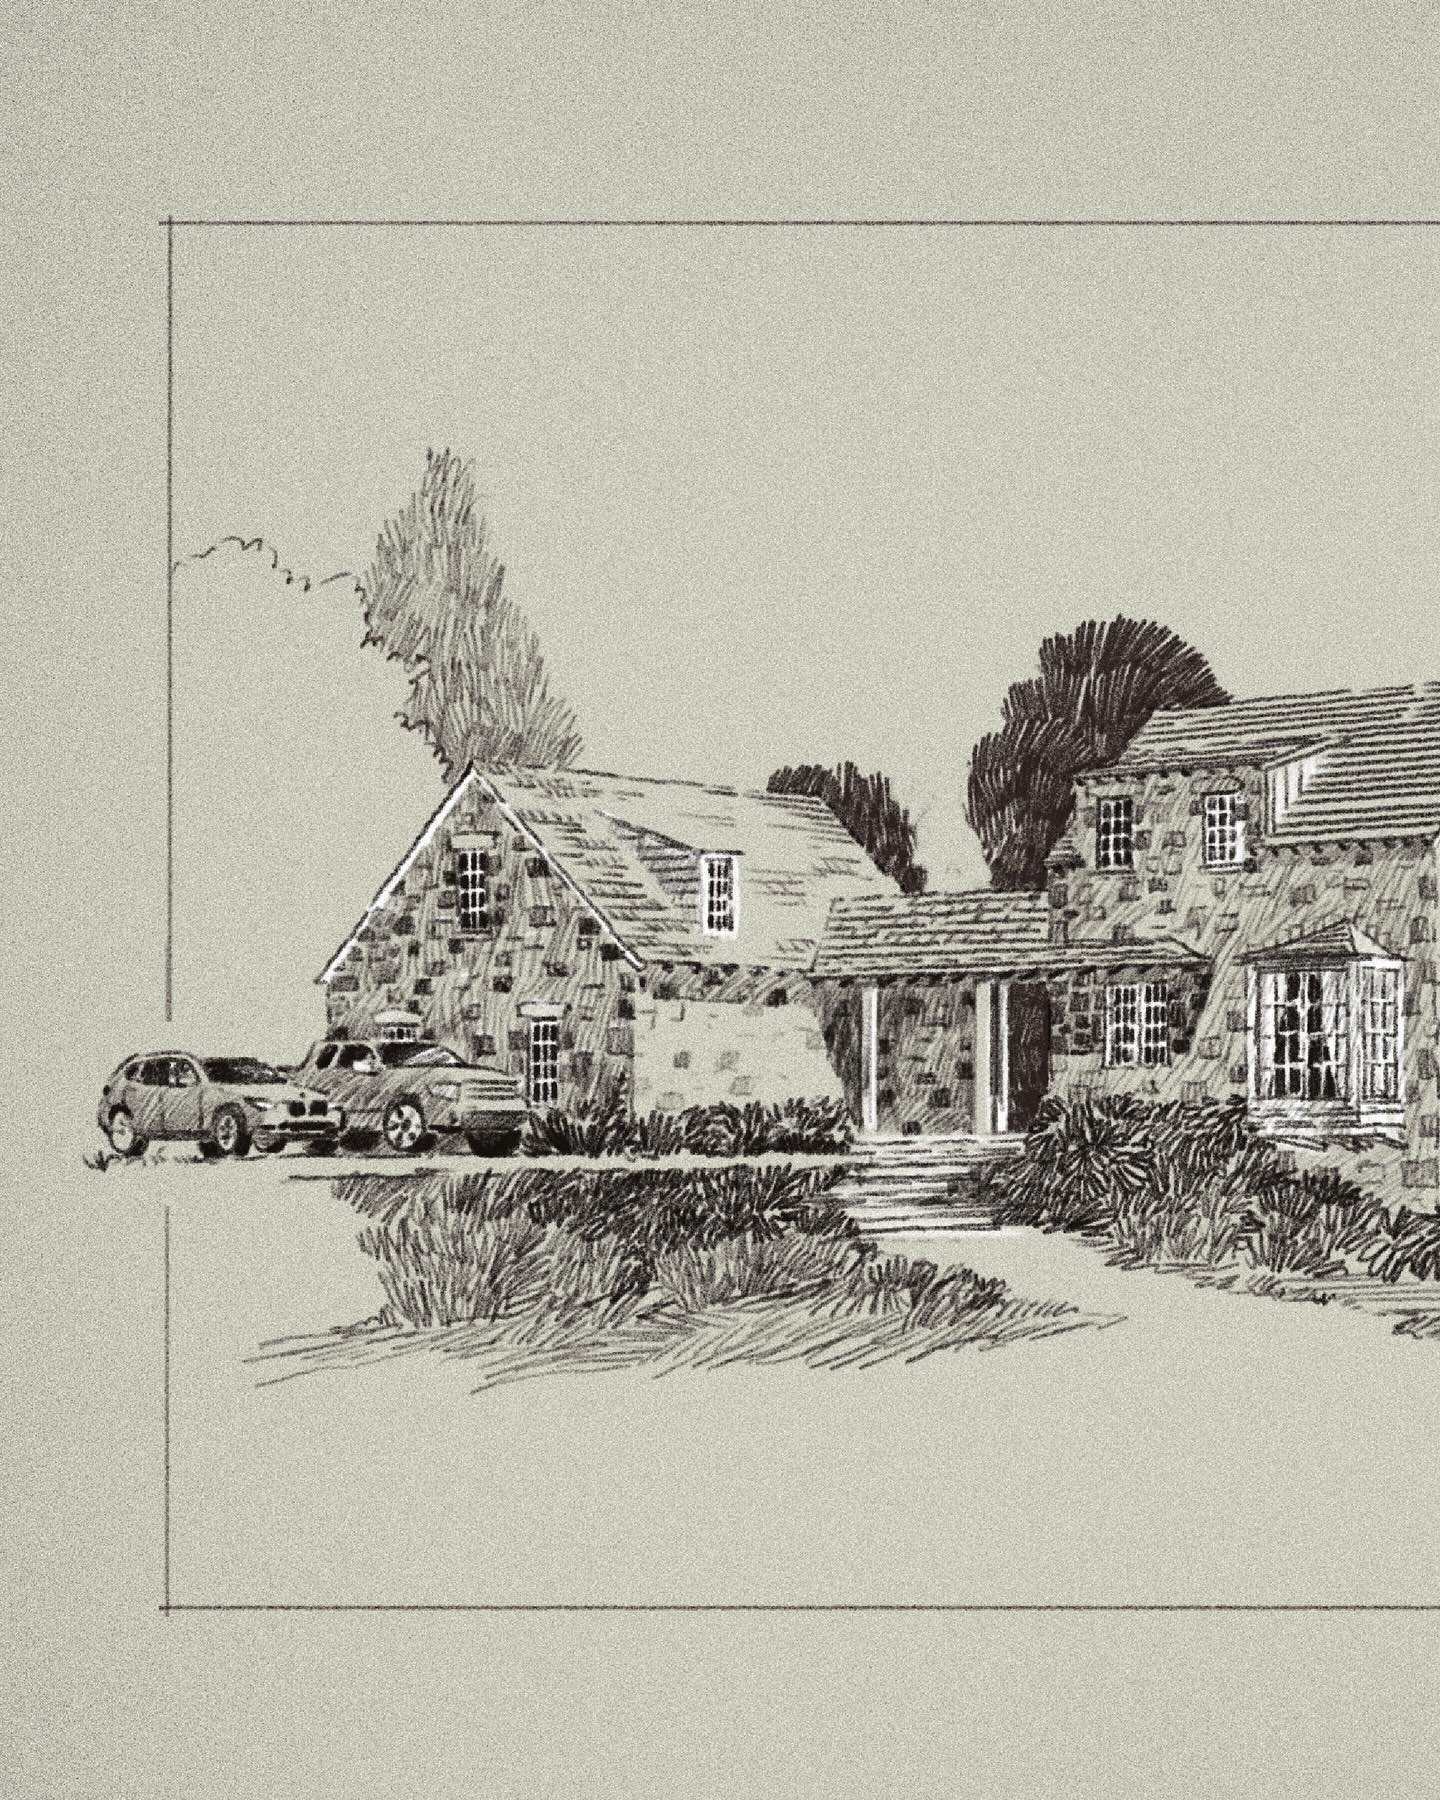 Sketch for an unrealized farmhouse project from a few years ago. @carlislemoorearchitects 
&darr;
&darr;
#architect #TraditionalDesign #ArchitectDesigned #TraditionalHouse #HomeInspiration #Homeinspo #HouseDesign #TraditionalArchitecture #Traditional